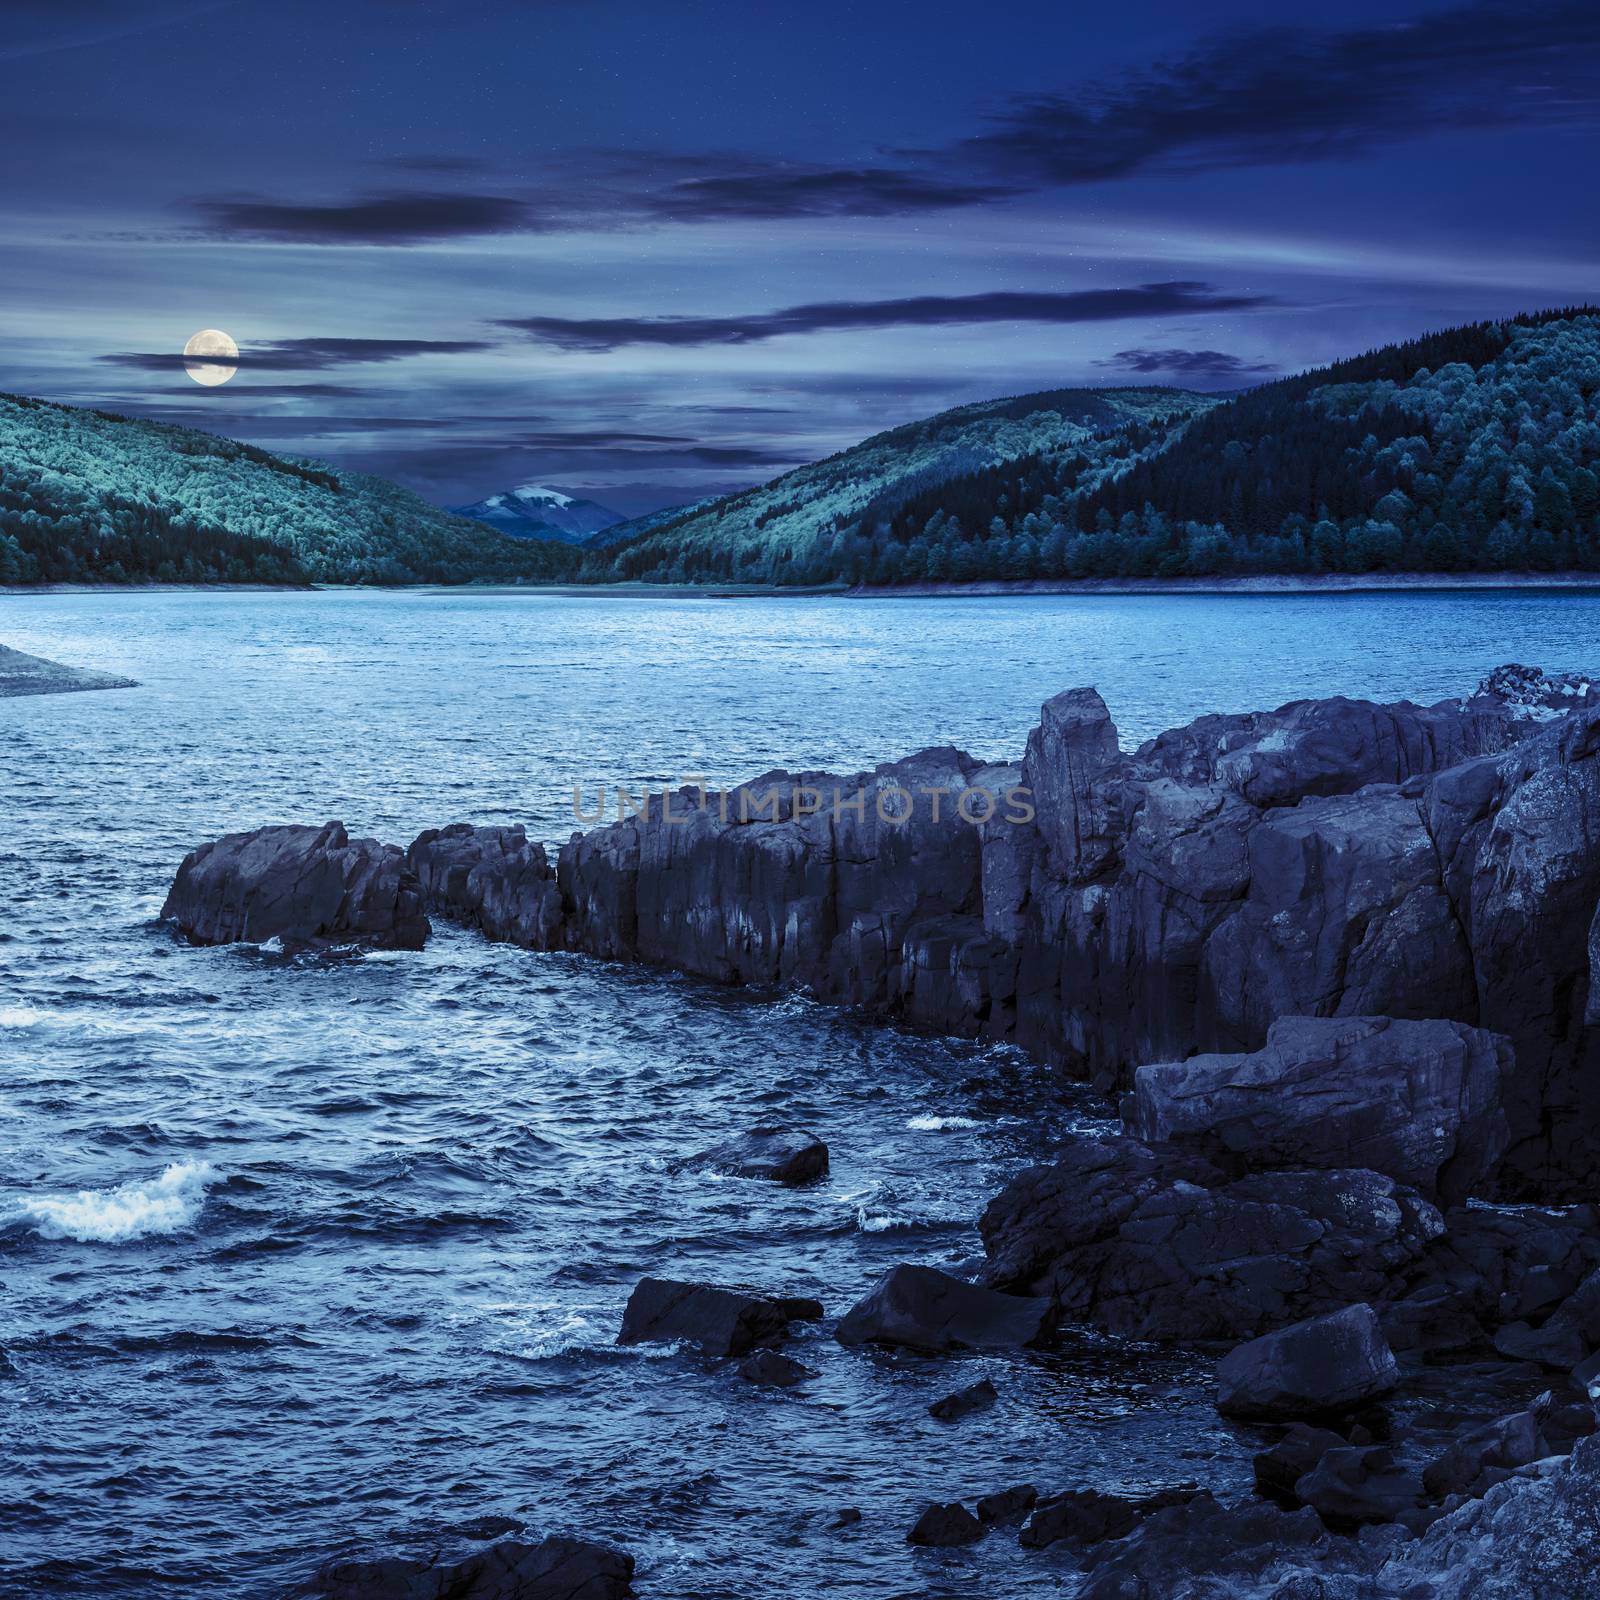 mountain lake with rocky shore at night by Pellinni